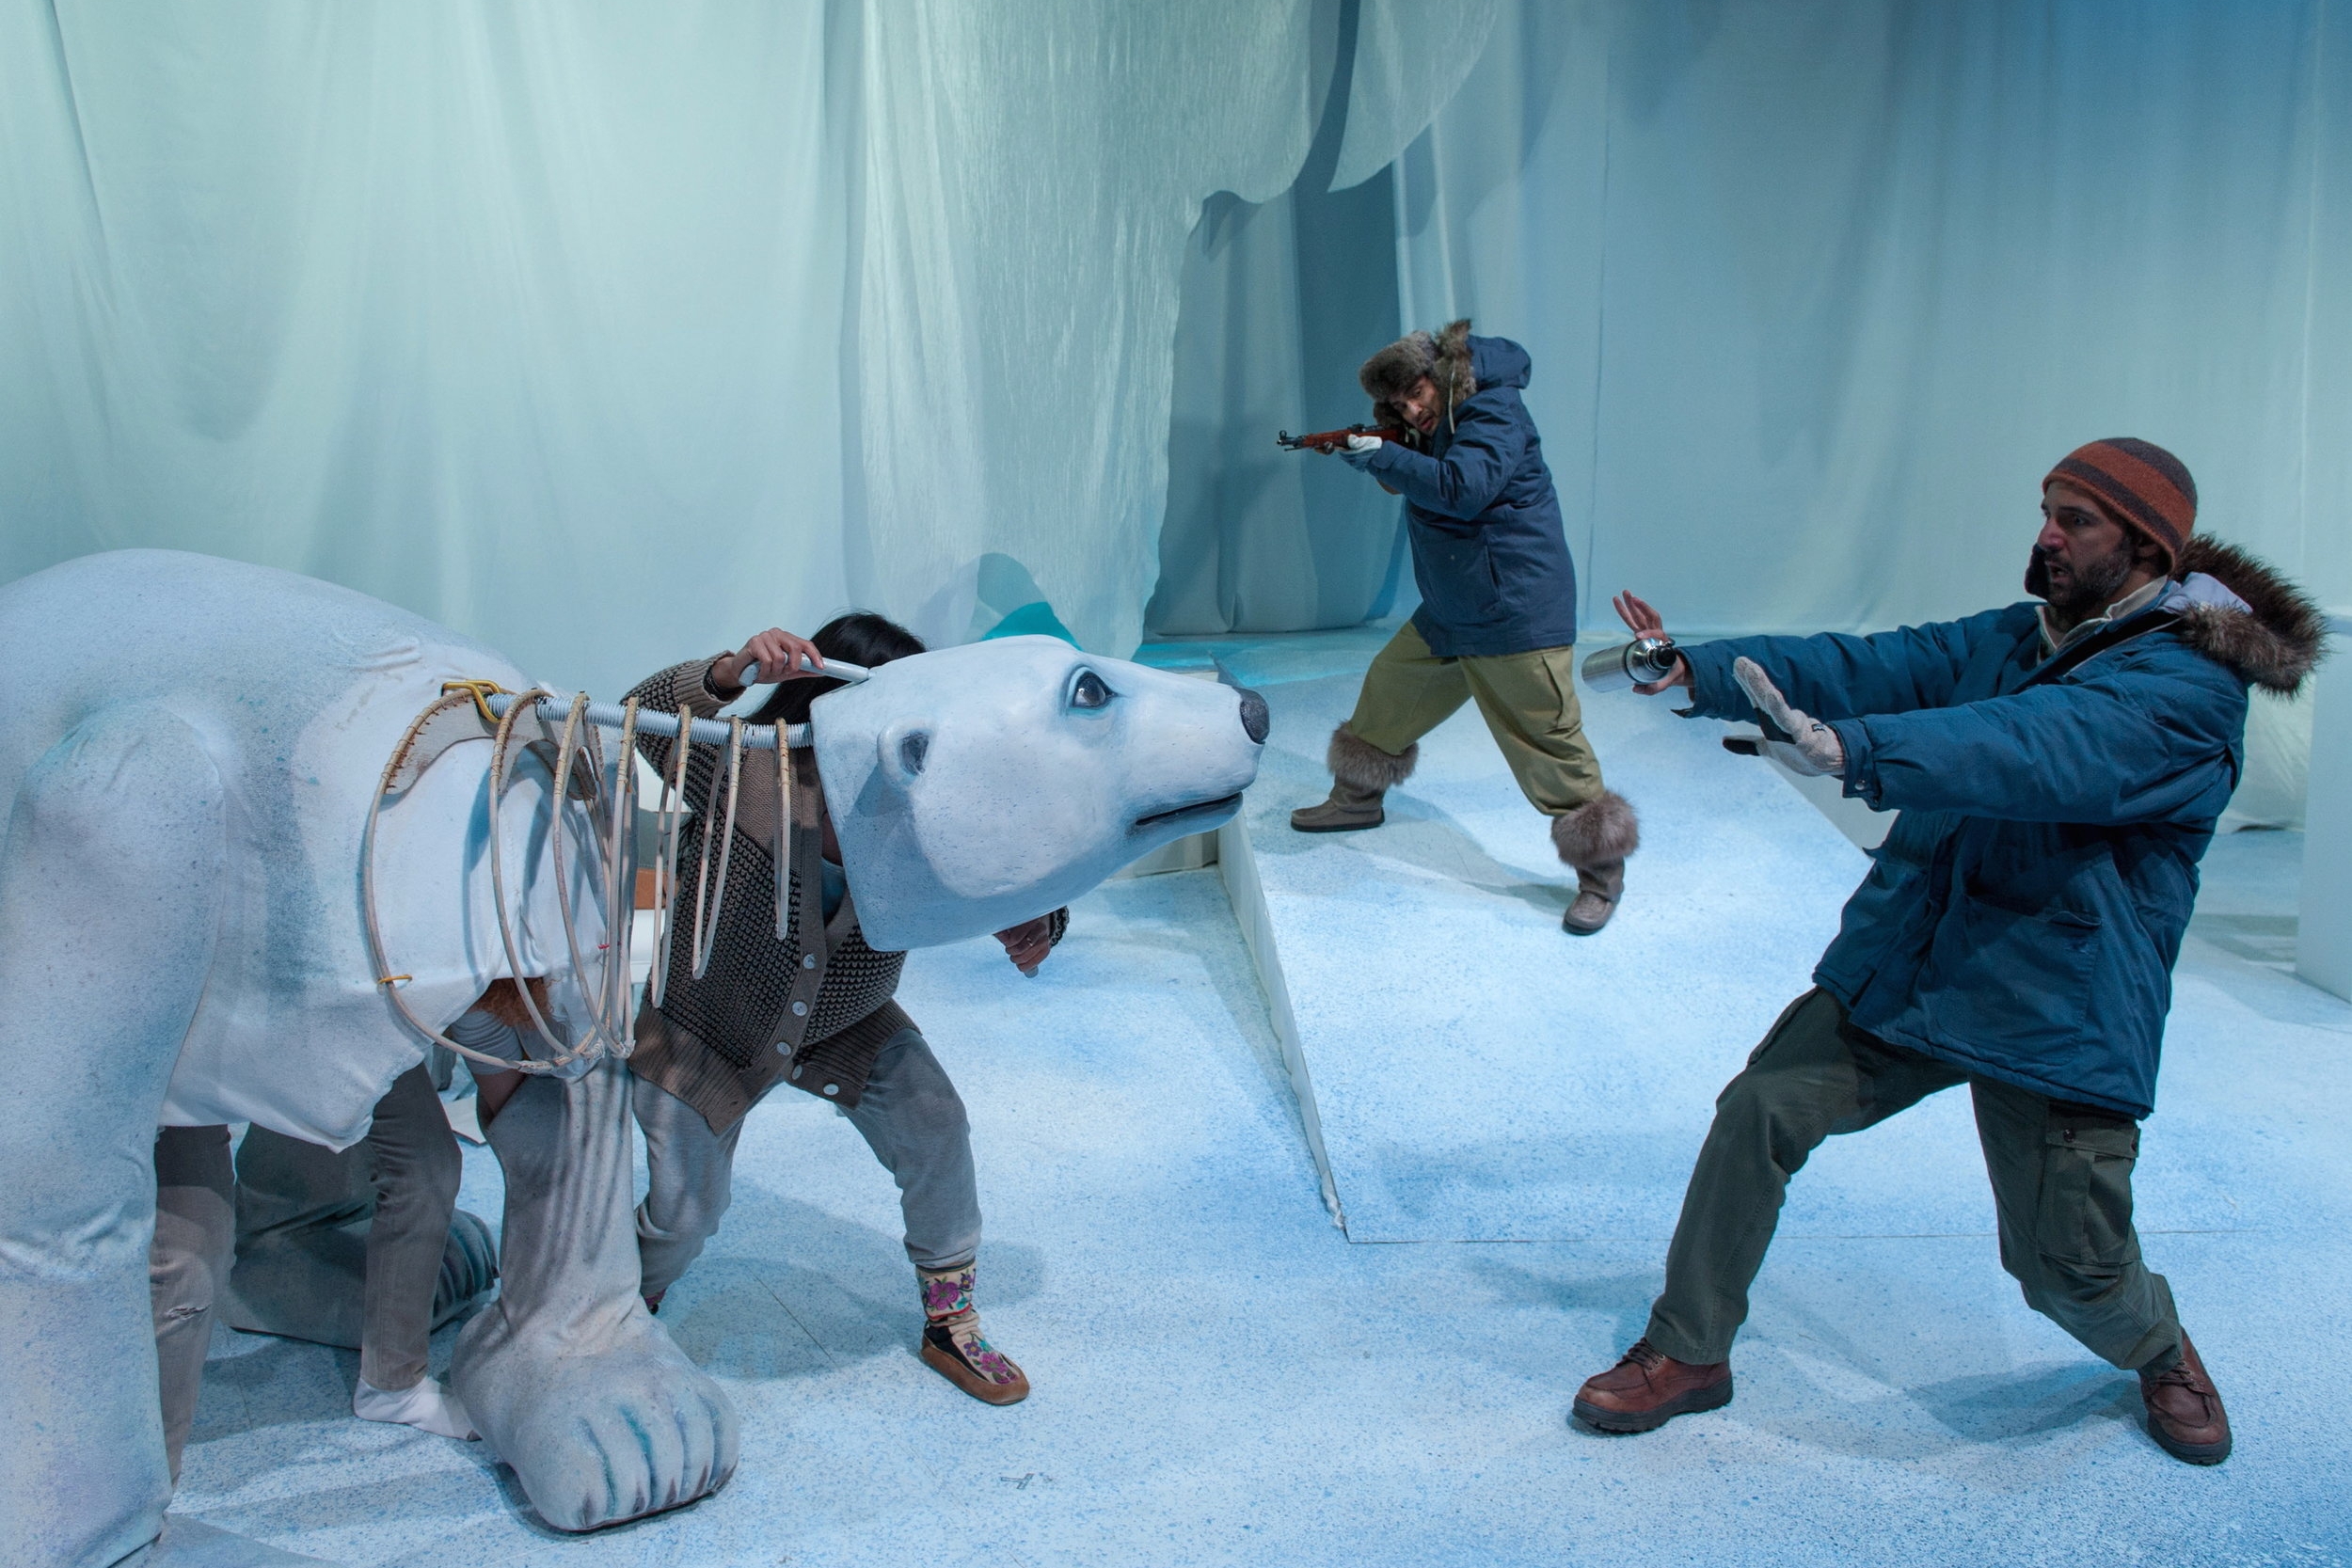 A person next to a puppet polar bear while a person with a gun stands in the background